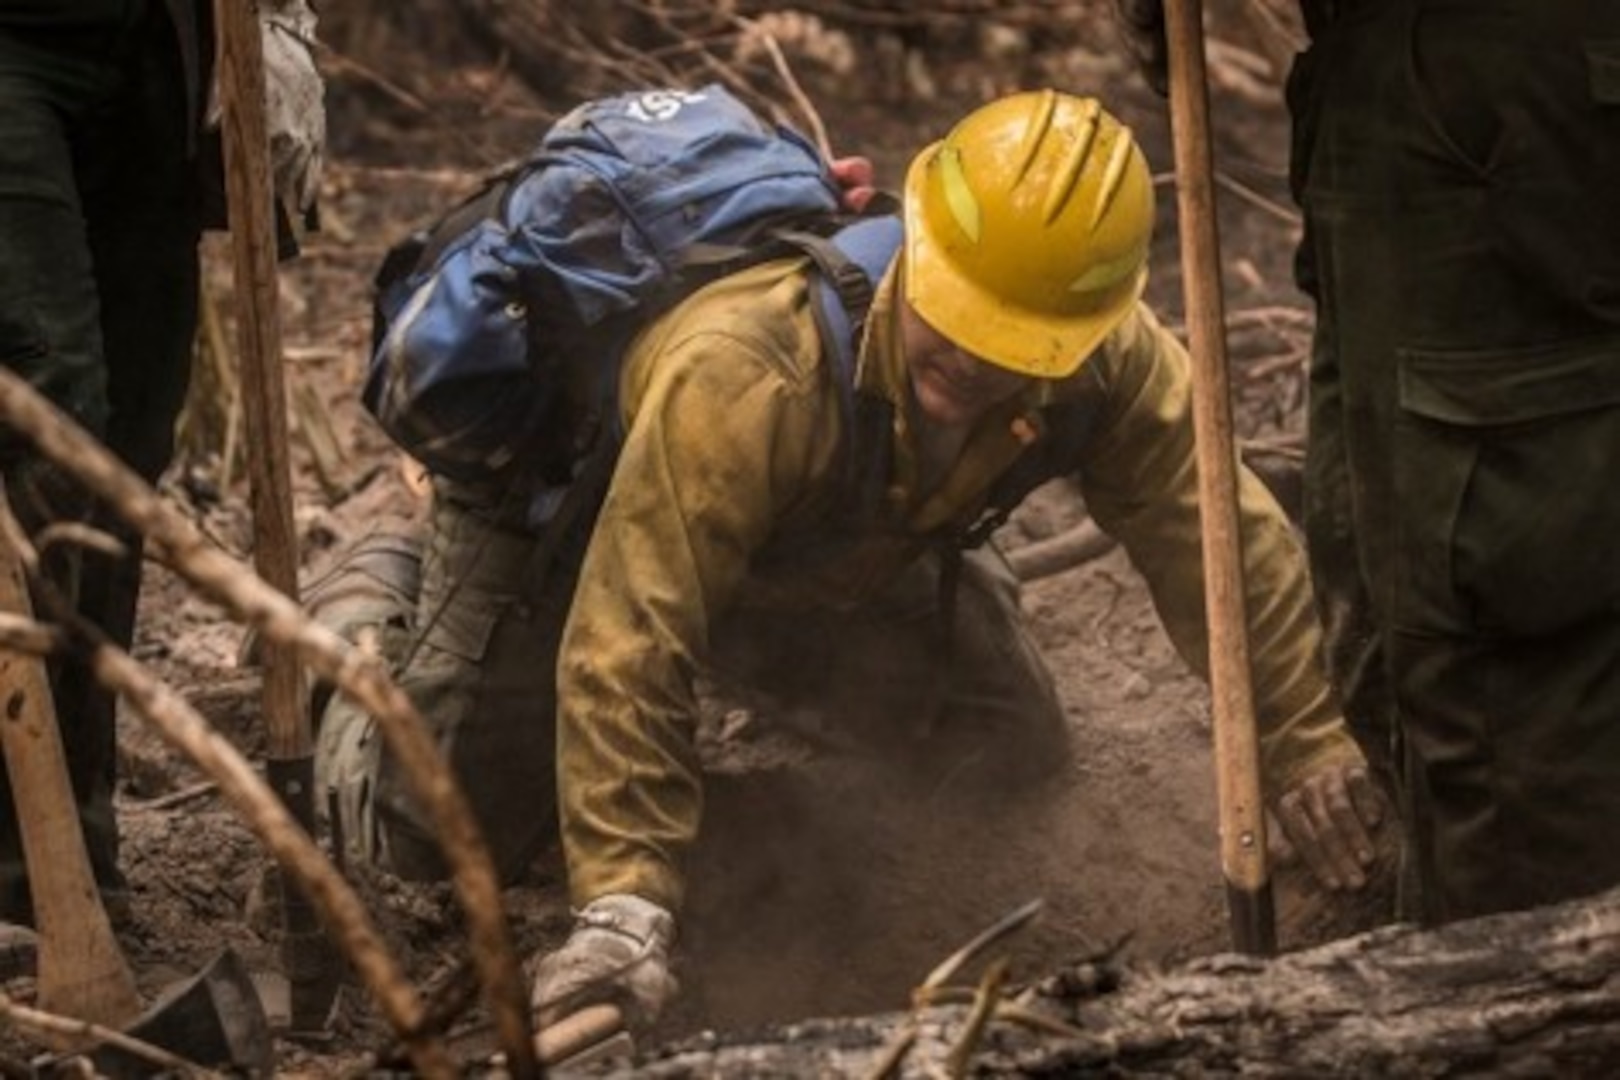 A U.S. Army Soldier deployed in support of wildland firefighting for the National Interagency Fire Center helps complete mop-up operations that are important to extinguishing and containing wildland fires.